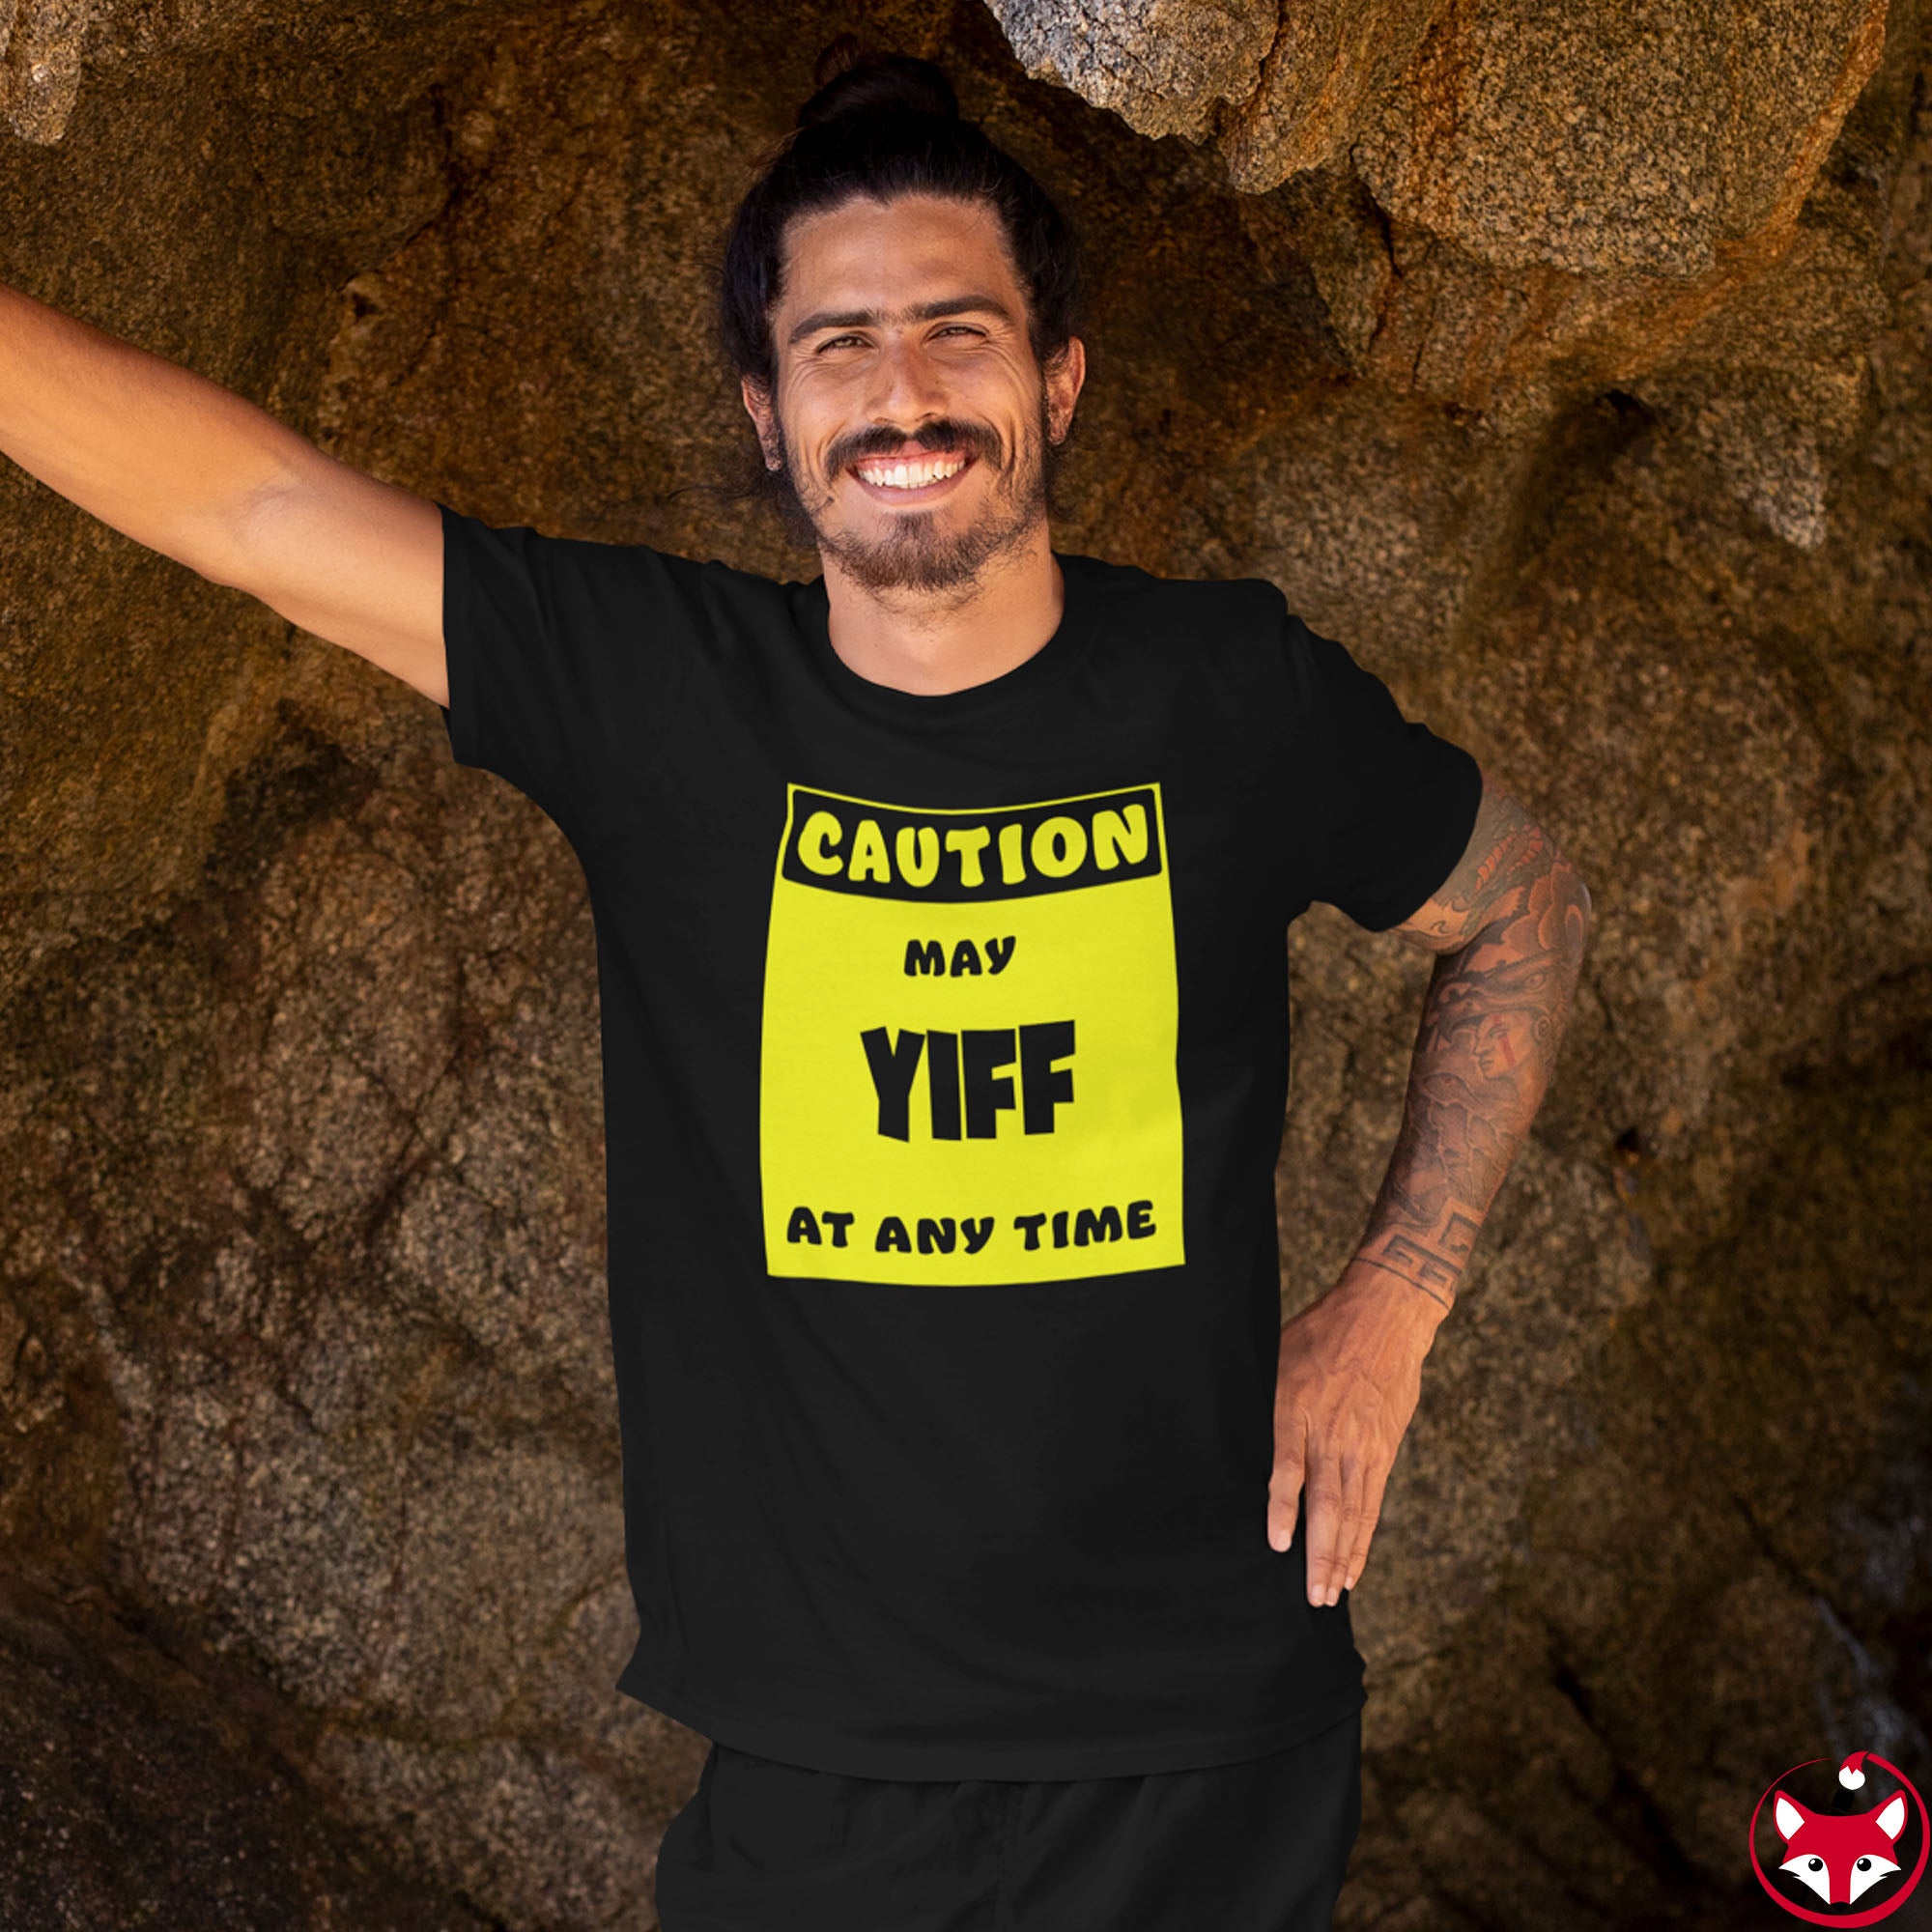 CAUTION! May YIFF at any time! - T-Shirt T-Shirt AFLT-Whootorca 